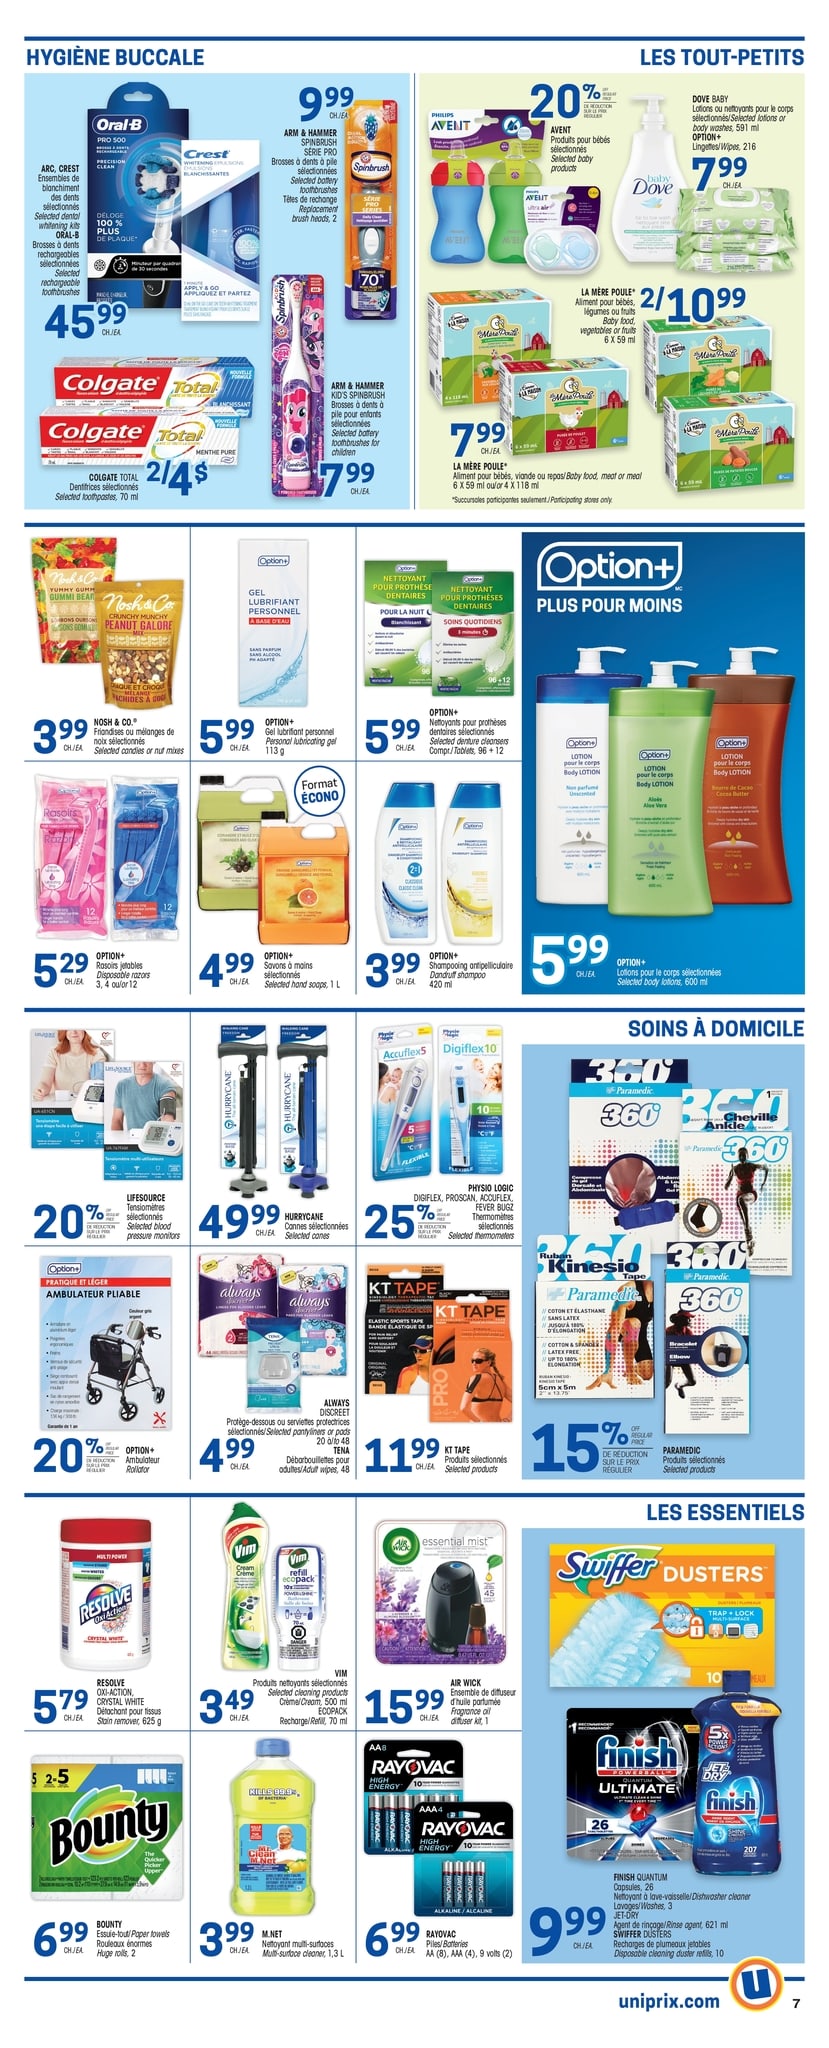 Uniprix - Weekly Flyer Specials - Page 11